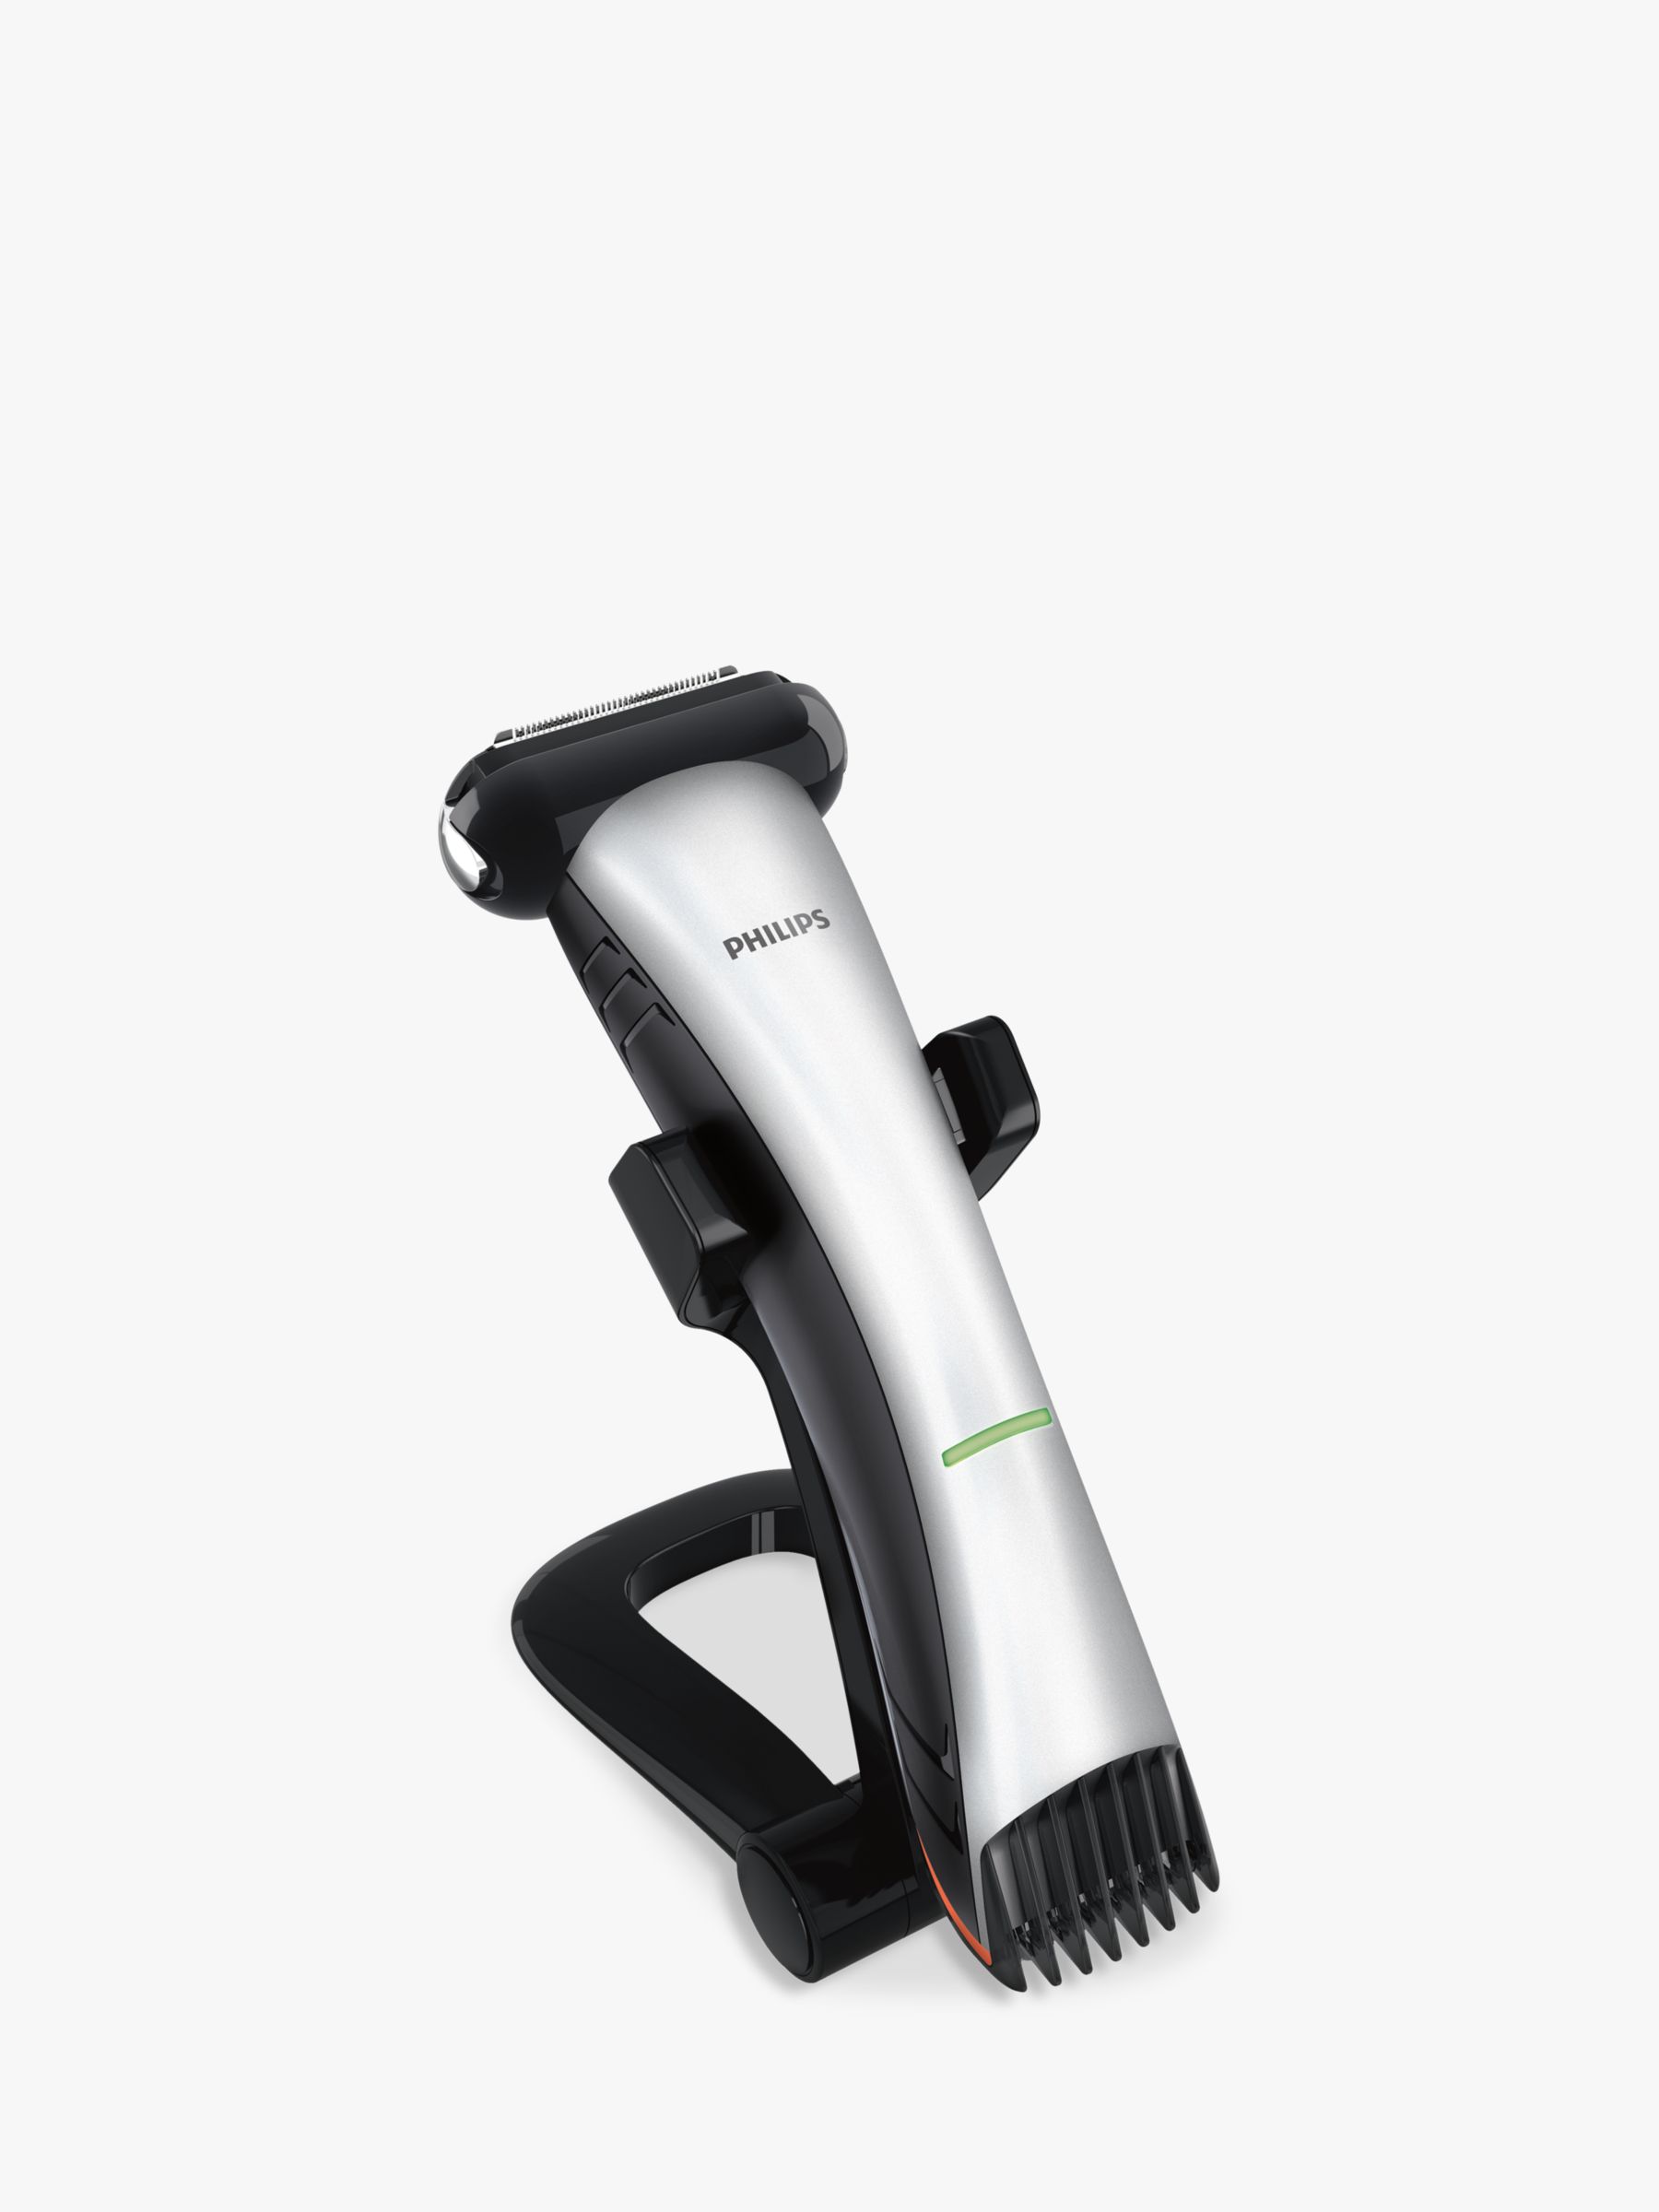 Philips TT2039/1 Series 7000 Body Groomer and Trimmer